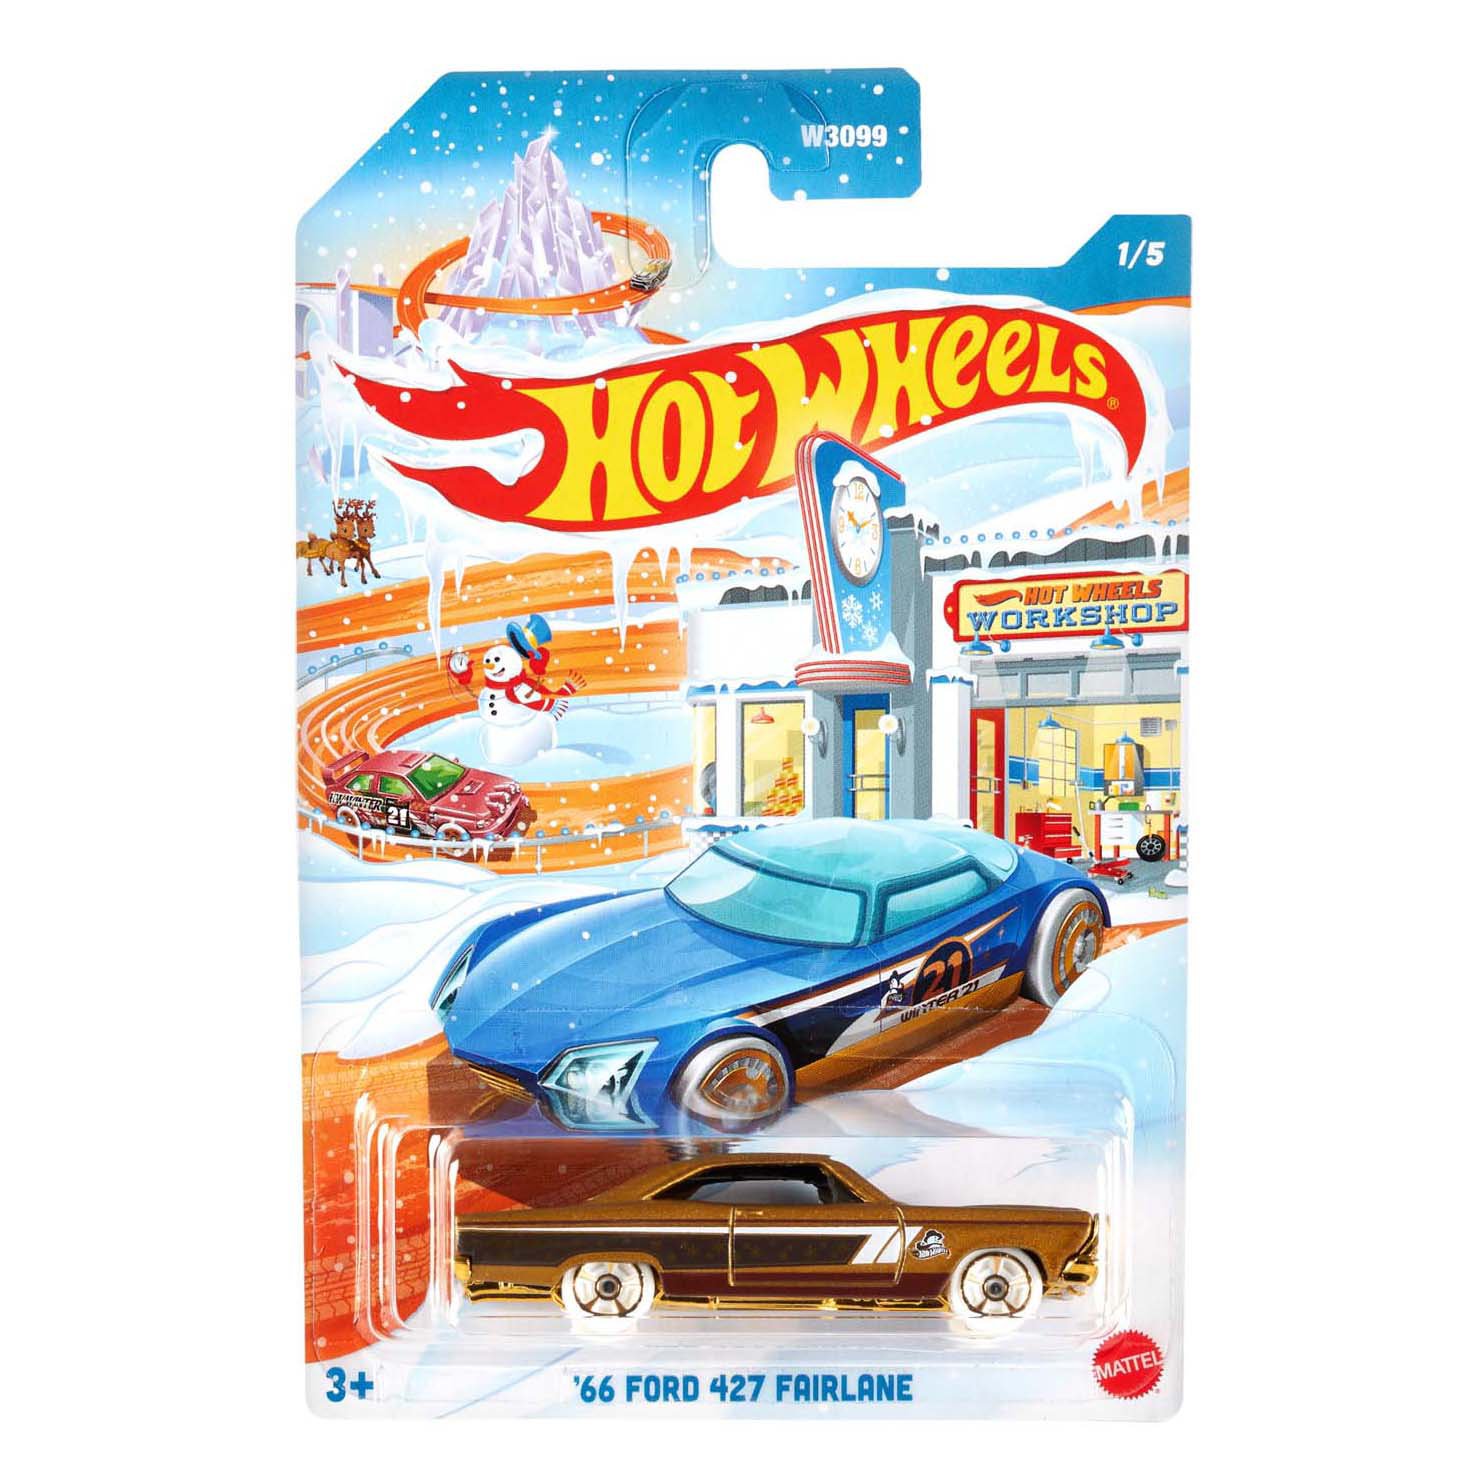 Hot Wheels Diecast Holiday Assortment Shop Toy Vehicles at HEB